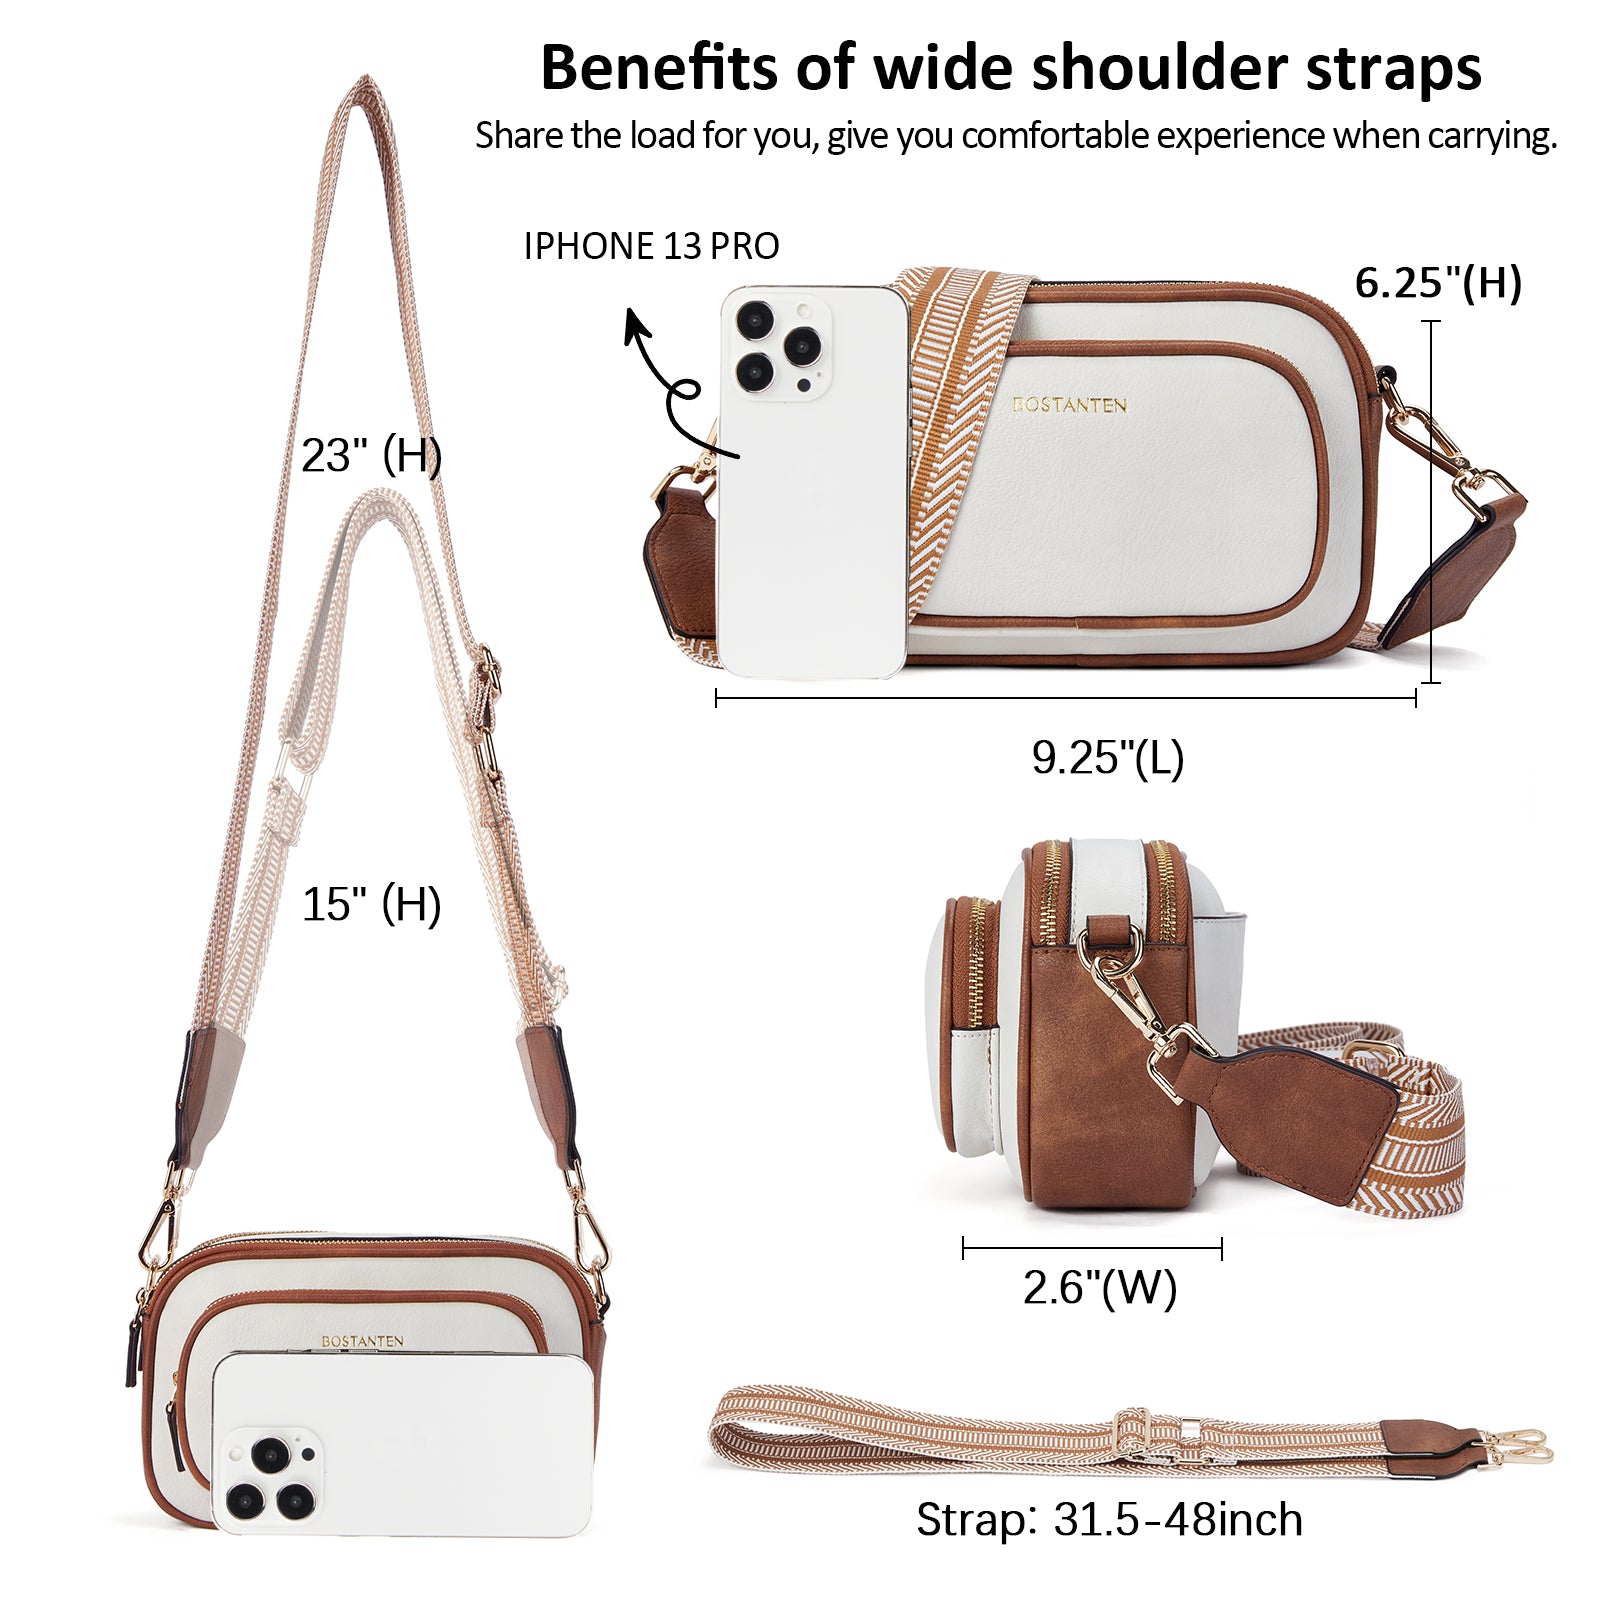 Give In Bag - Small Crossbody Bag for Women